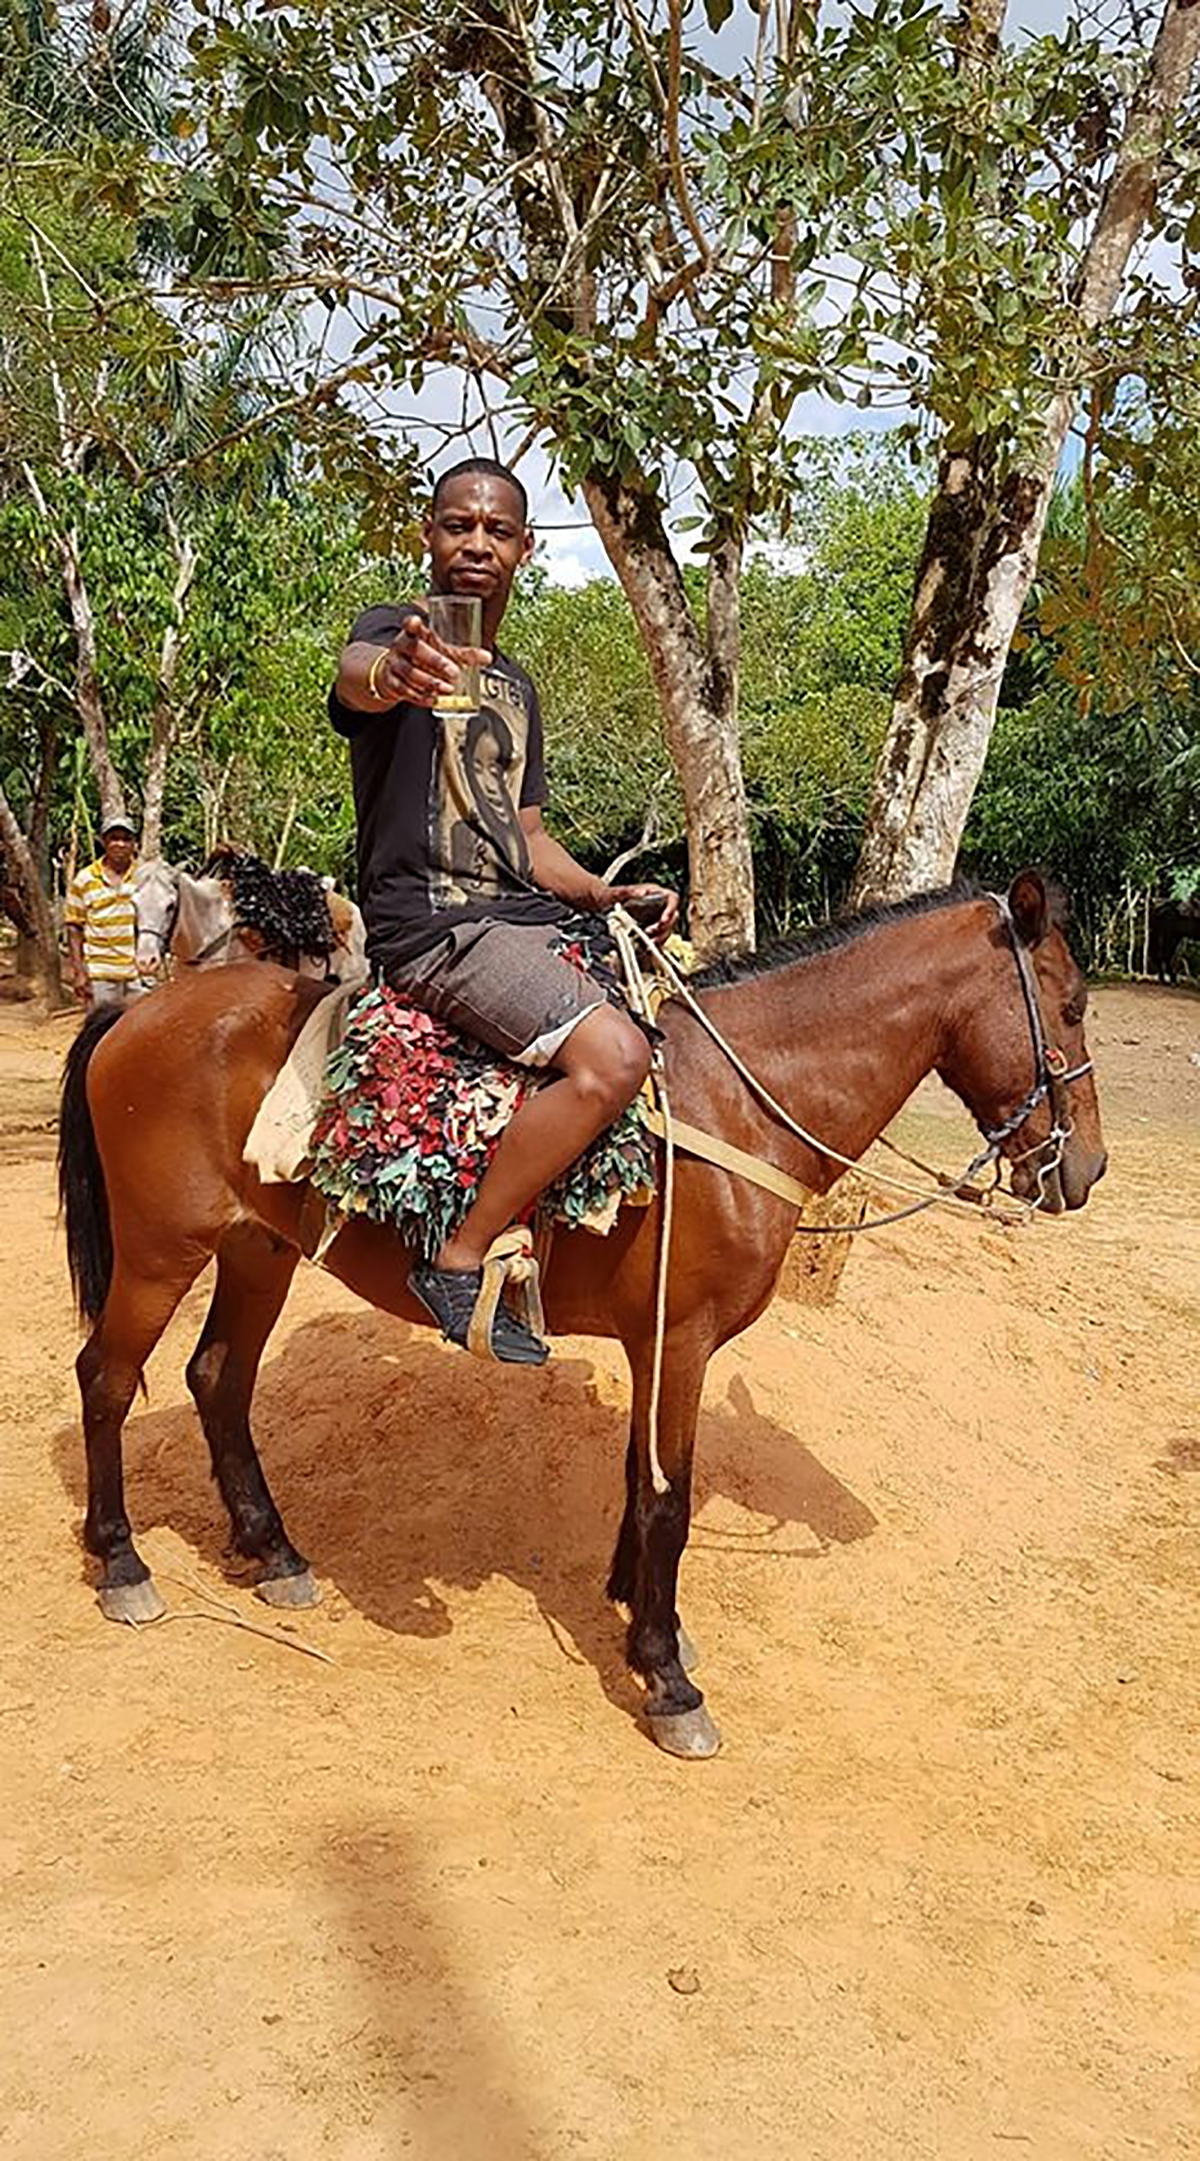 PHOTO: Orlando Moore, seen on horseback, is seen in this image taken March 26, 2019 at the waterfall of El Limon, Samana, Dominican Republic.